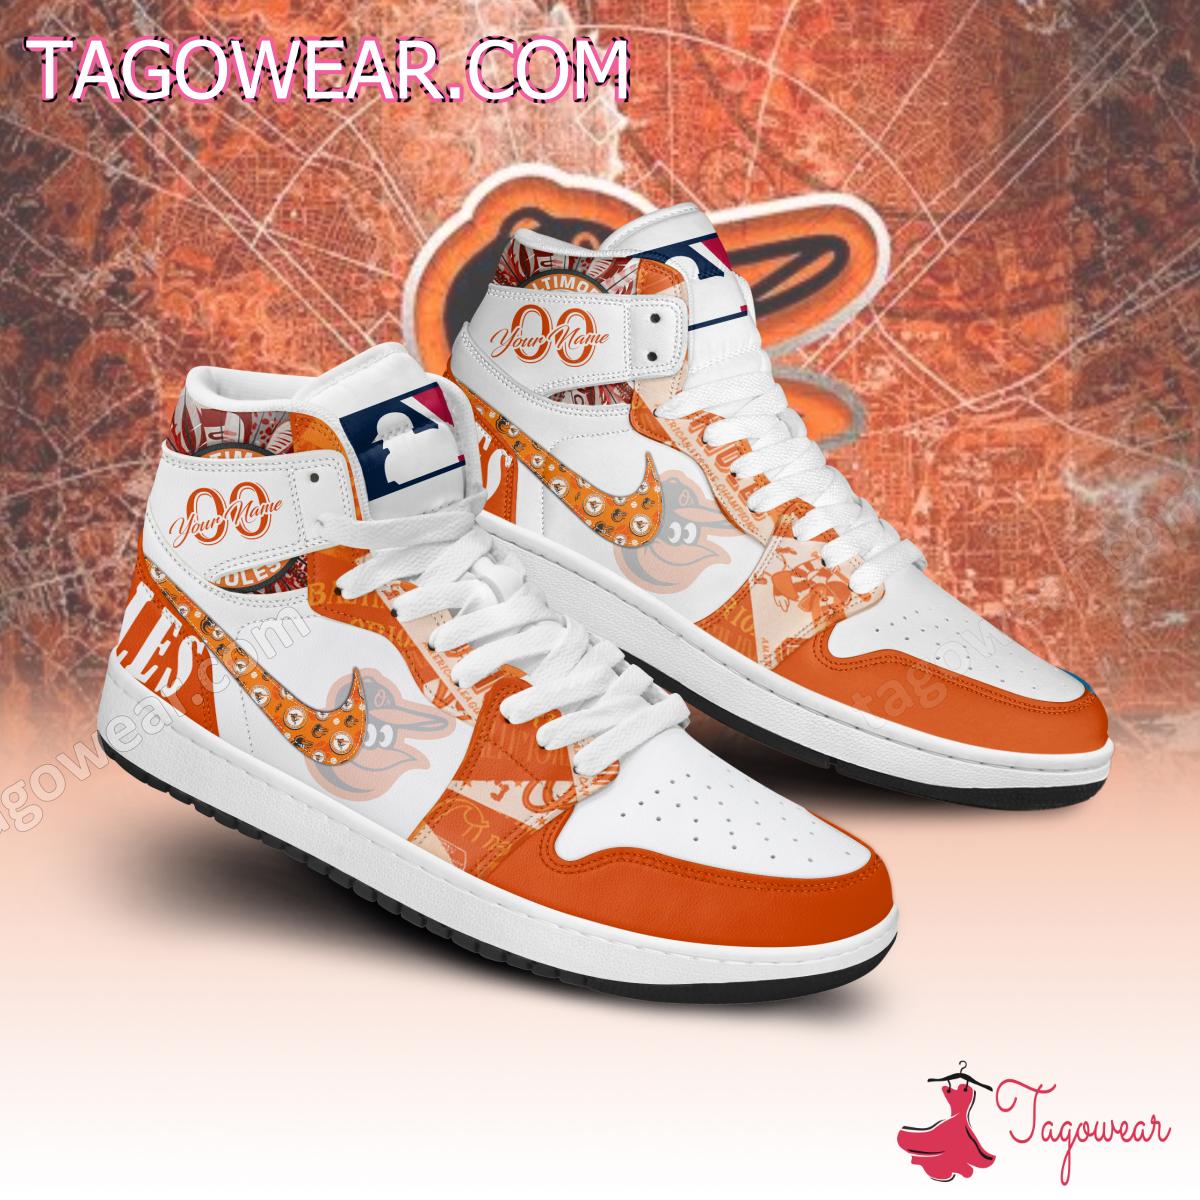 Baltimore Orioles Mlb Personalized Air Jordan High Top Shoes a